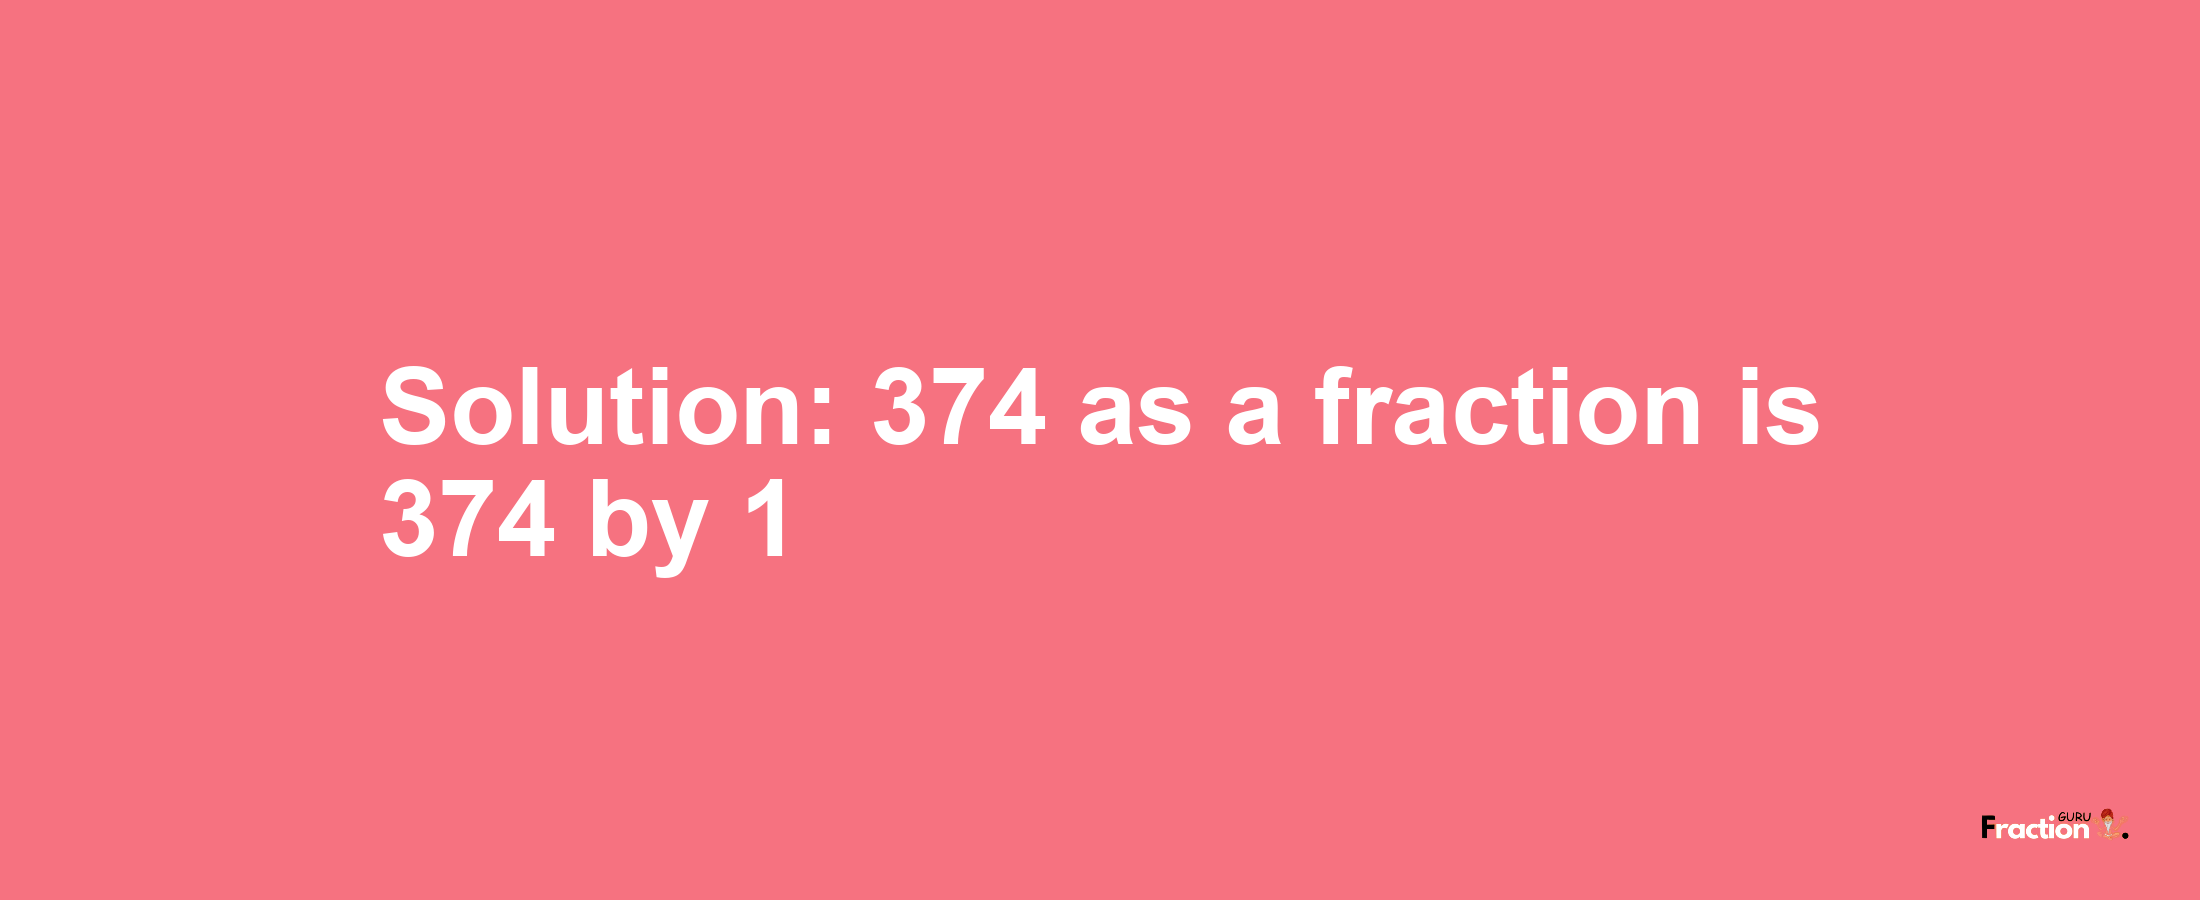 Solution:374 as a fraction is 374/1